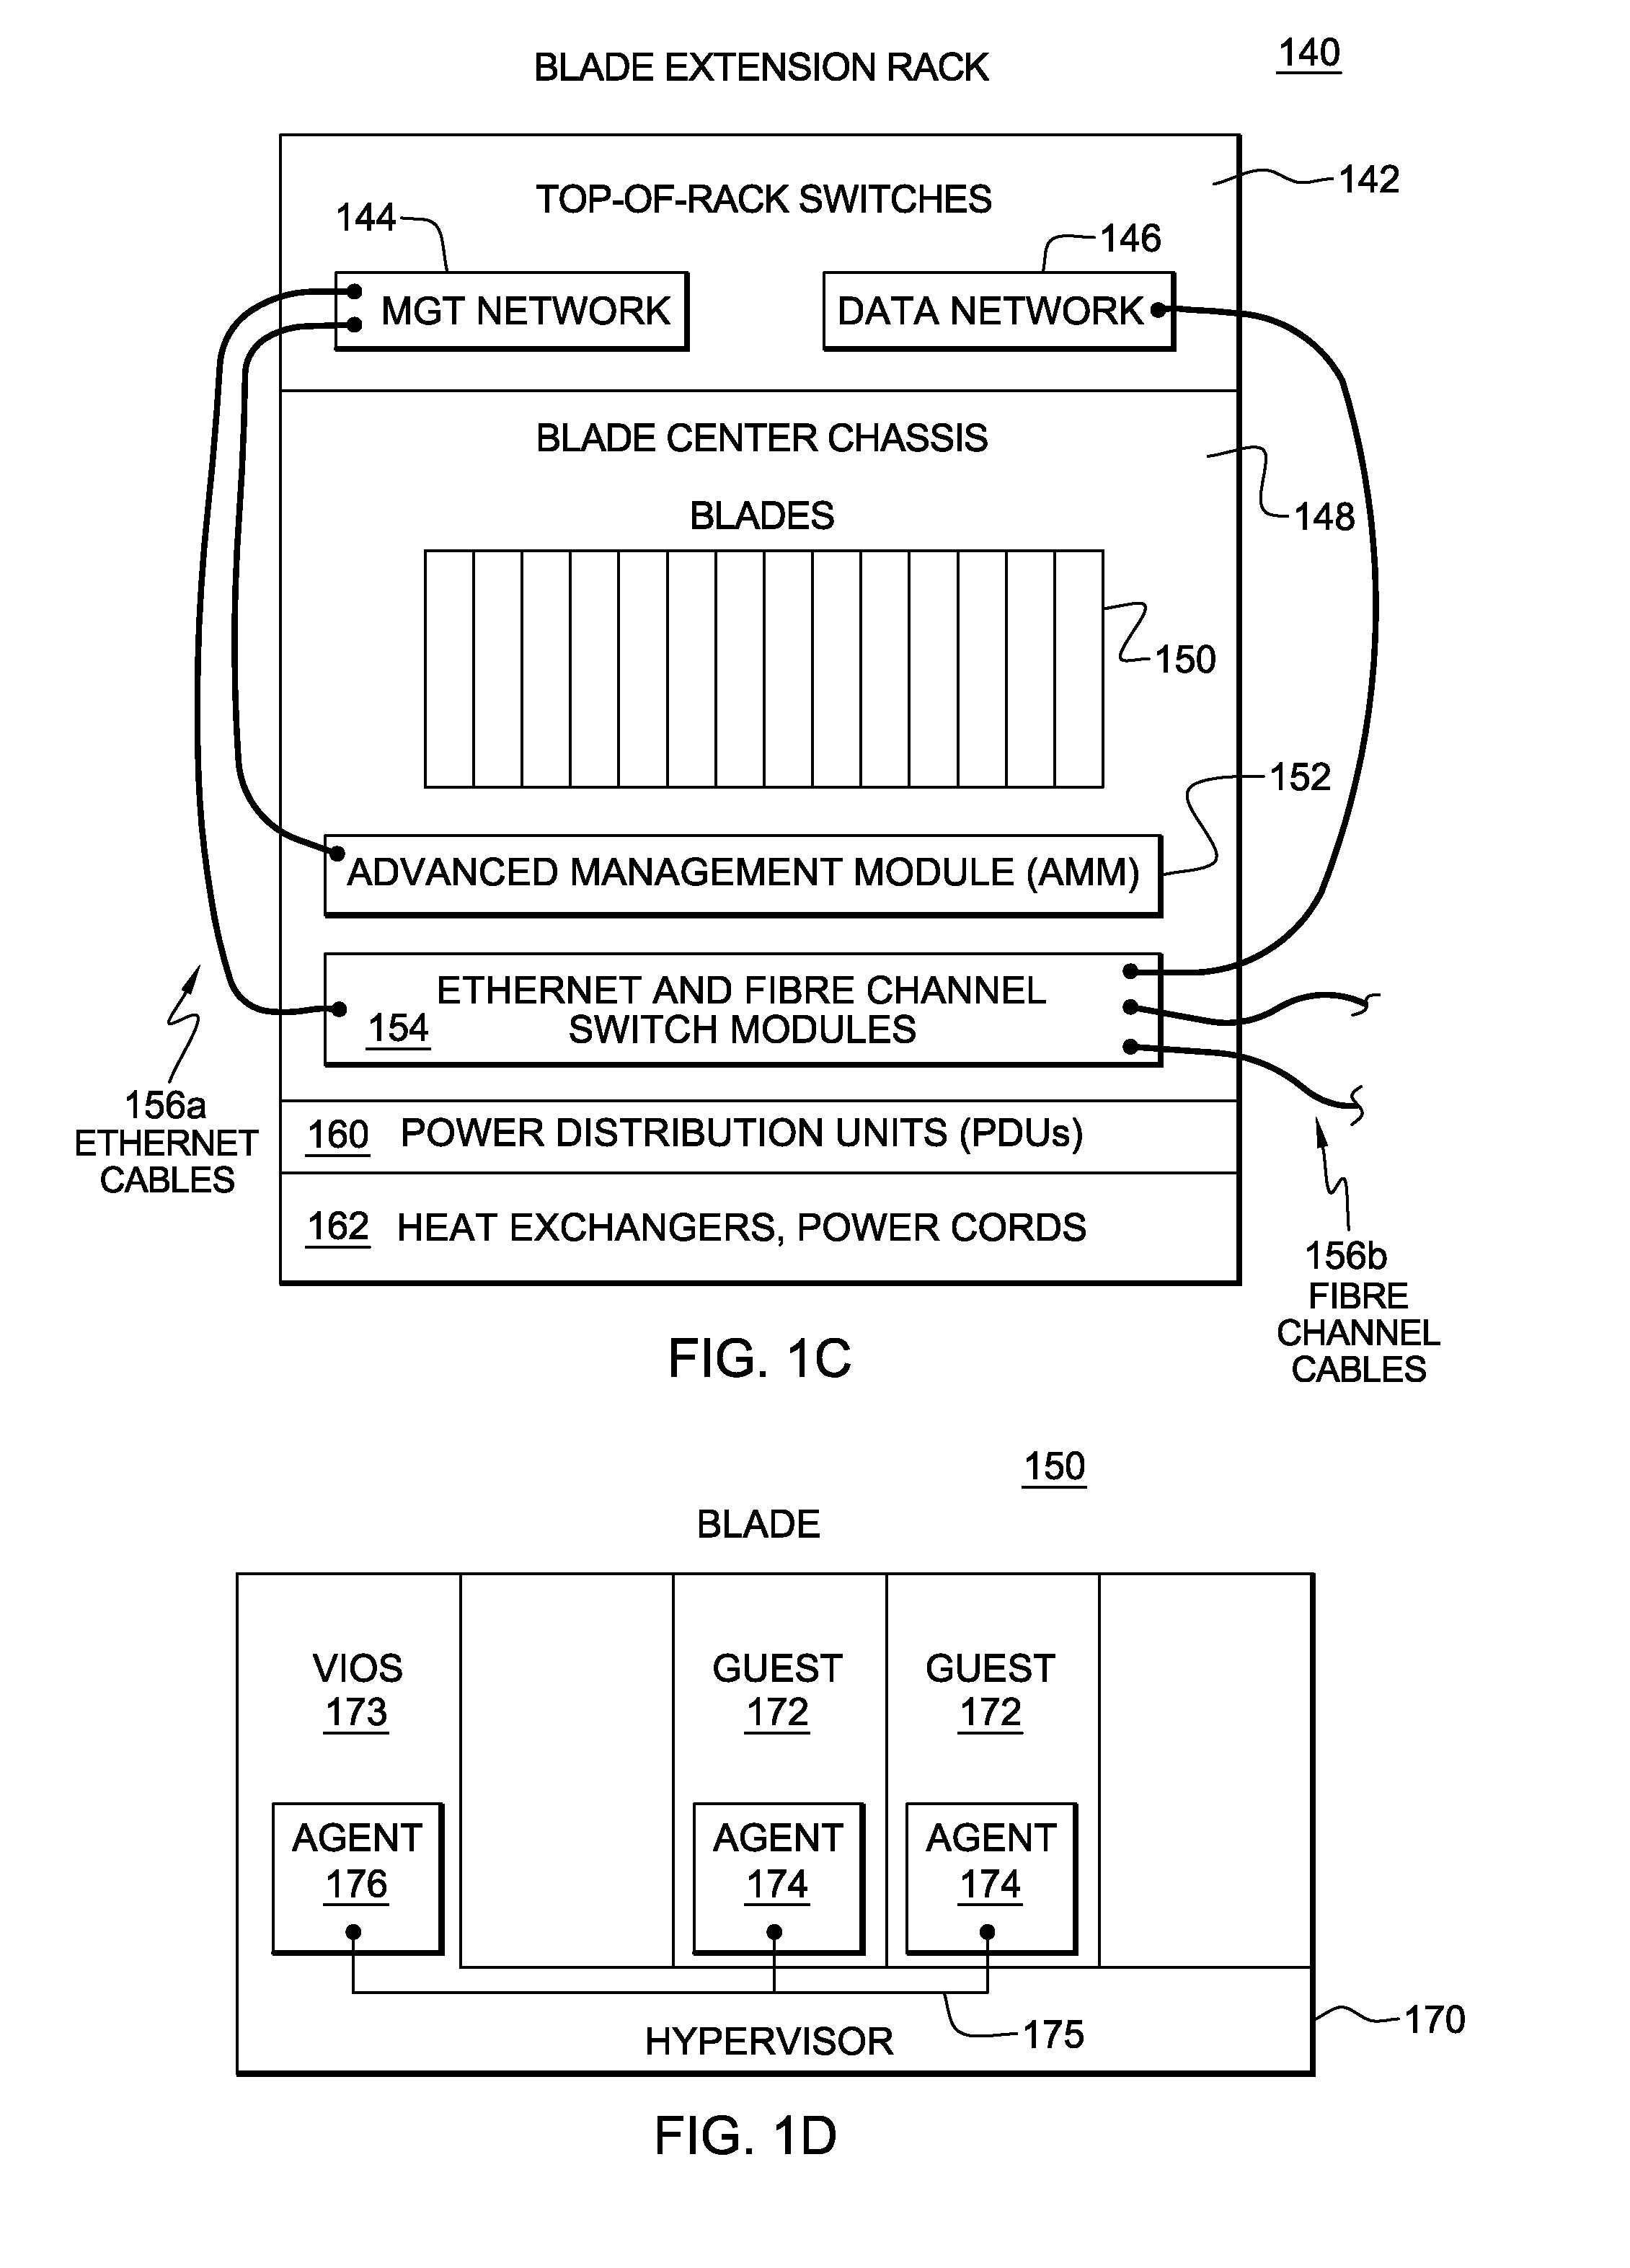 Integration of heterogeneous computing systems into a hybrid computing system